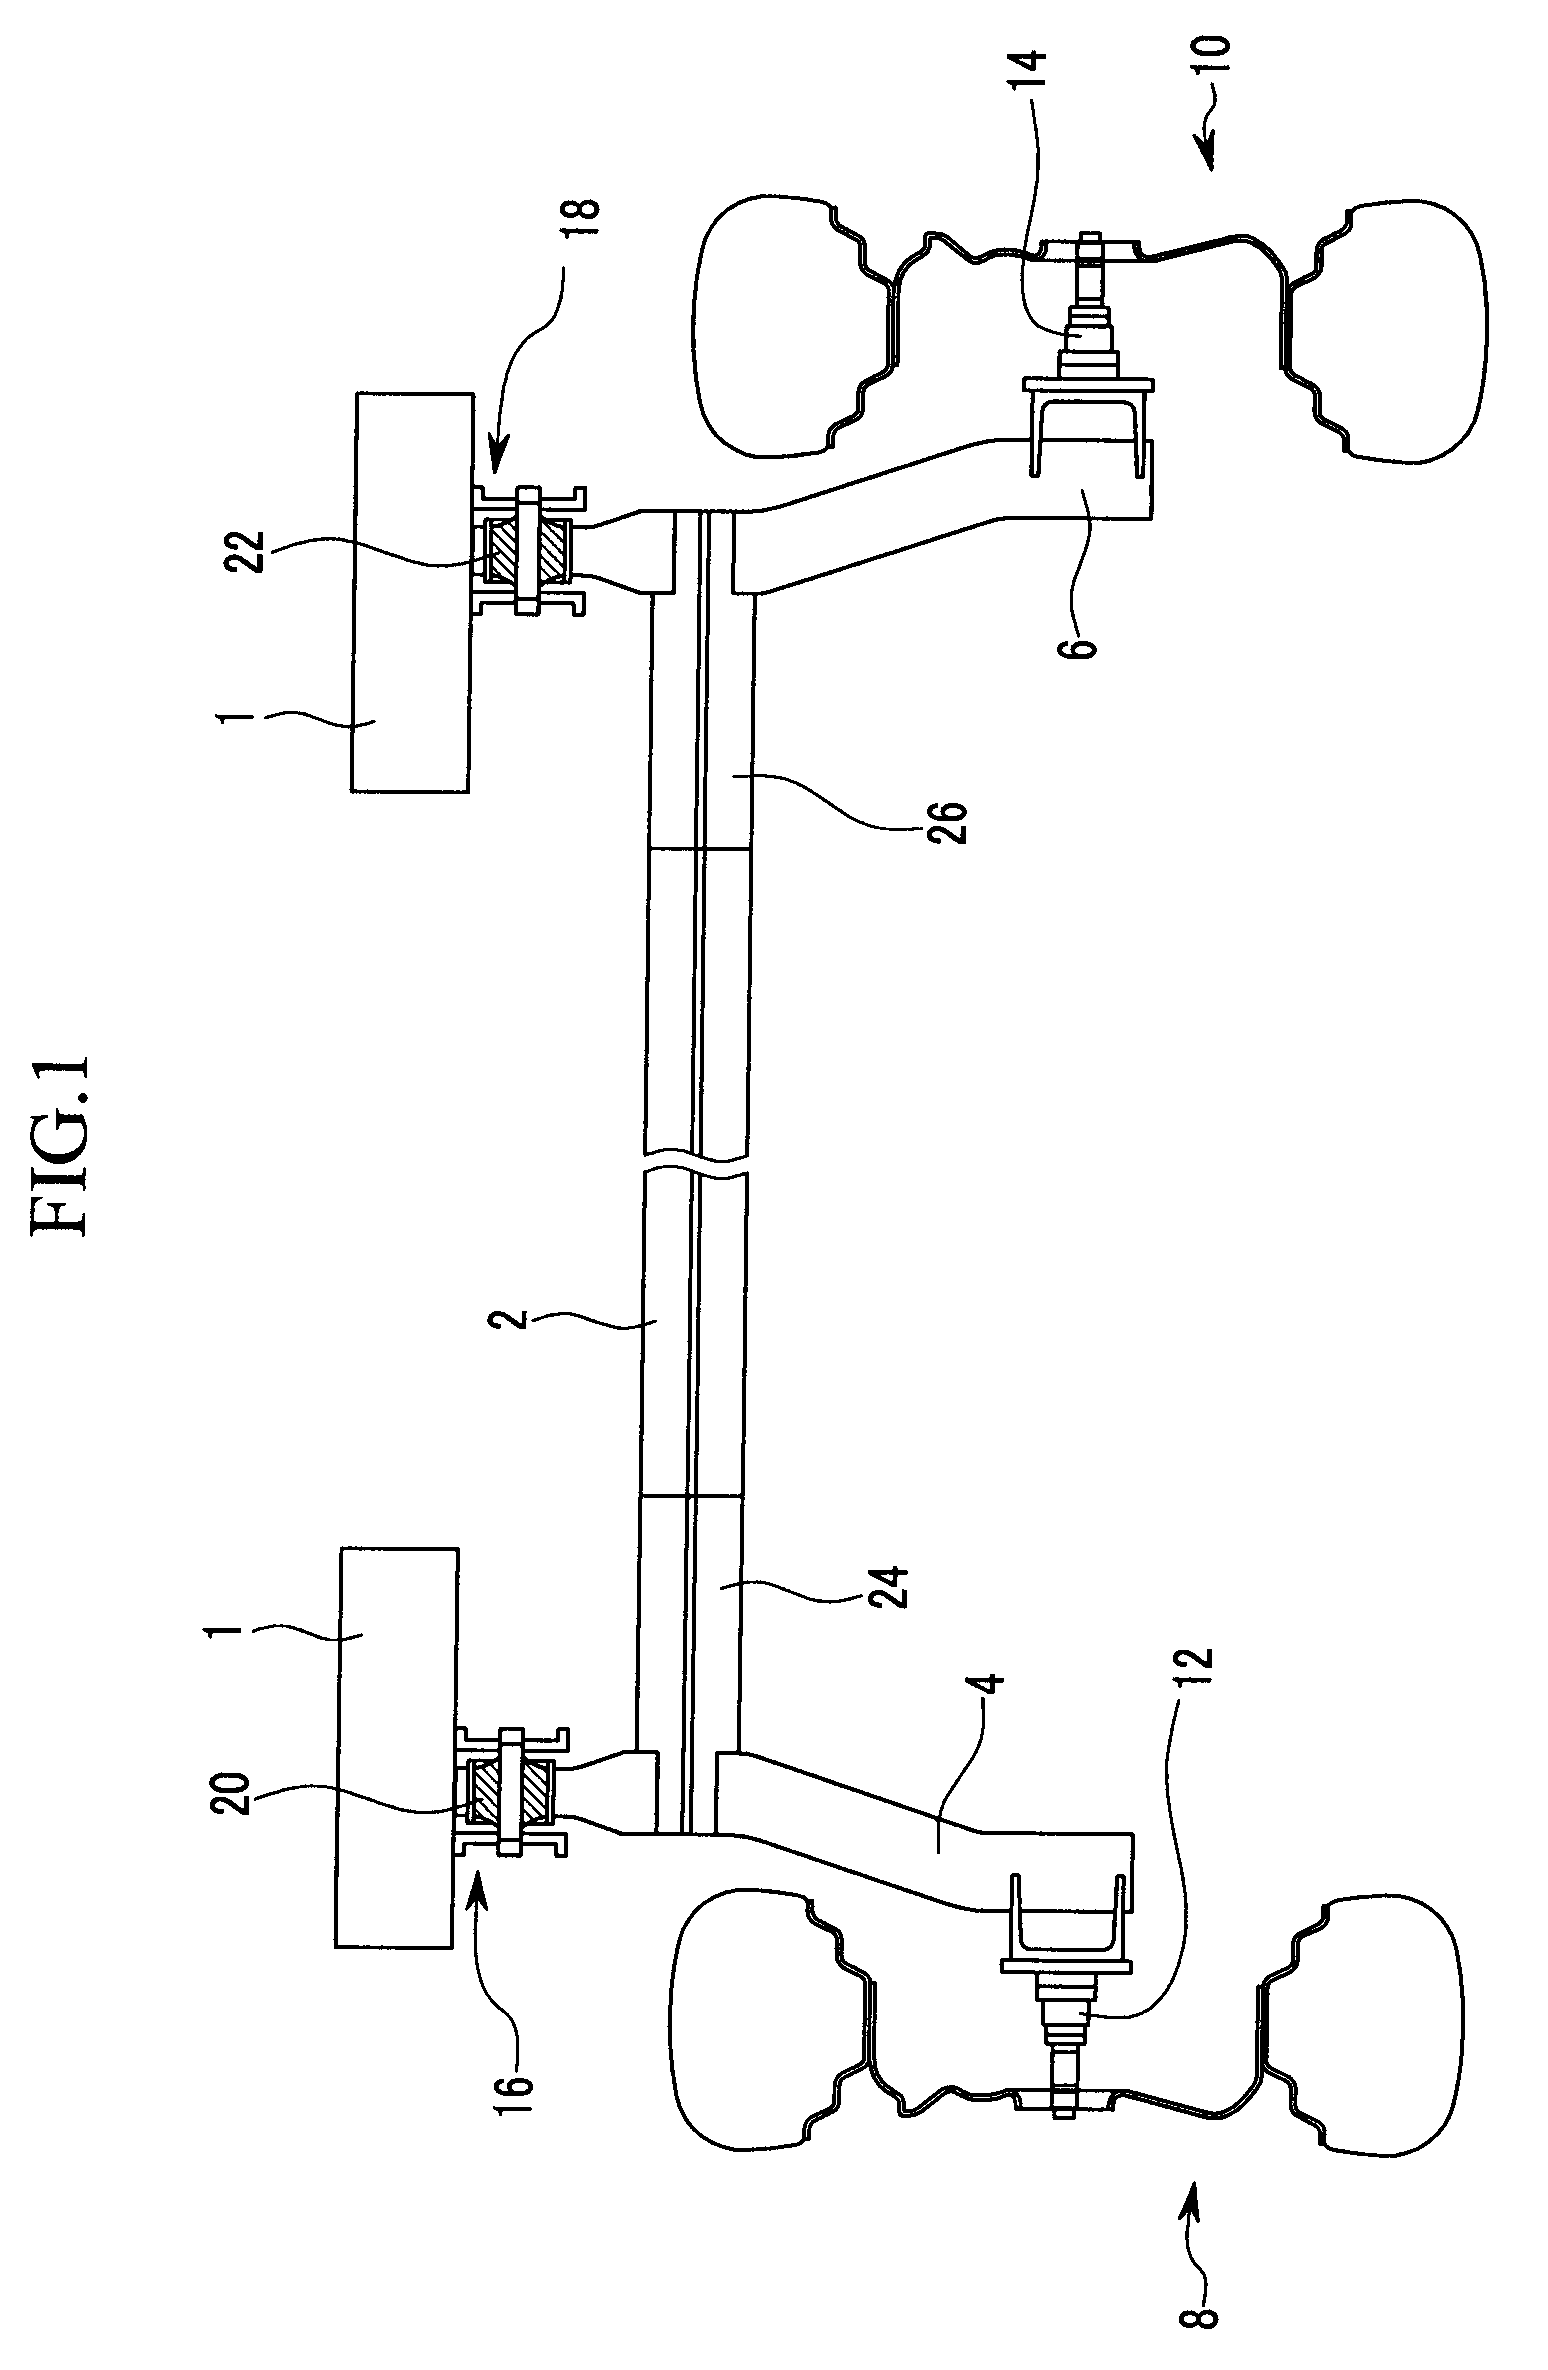 Suspension System for Vehicle